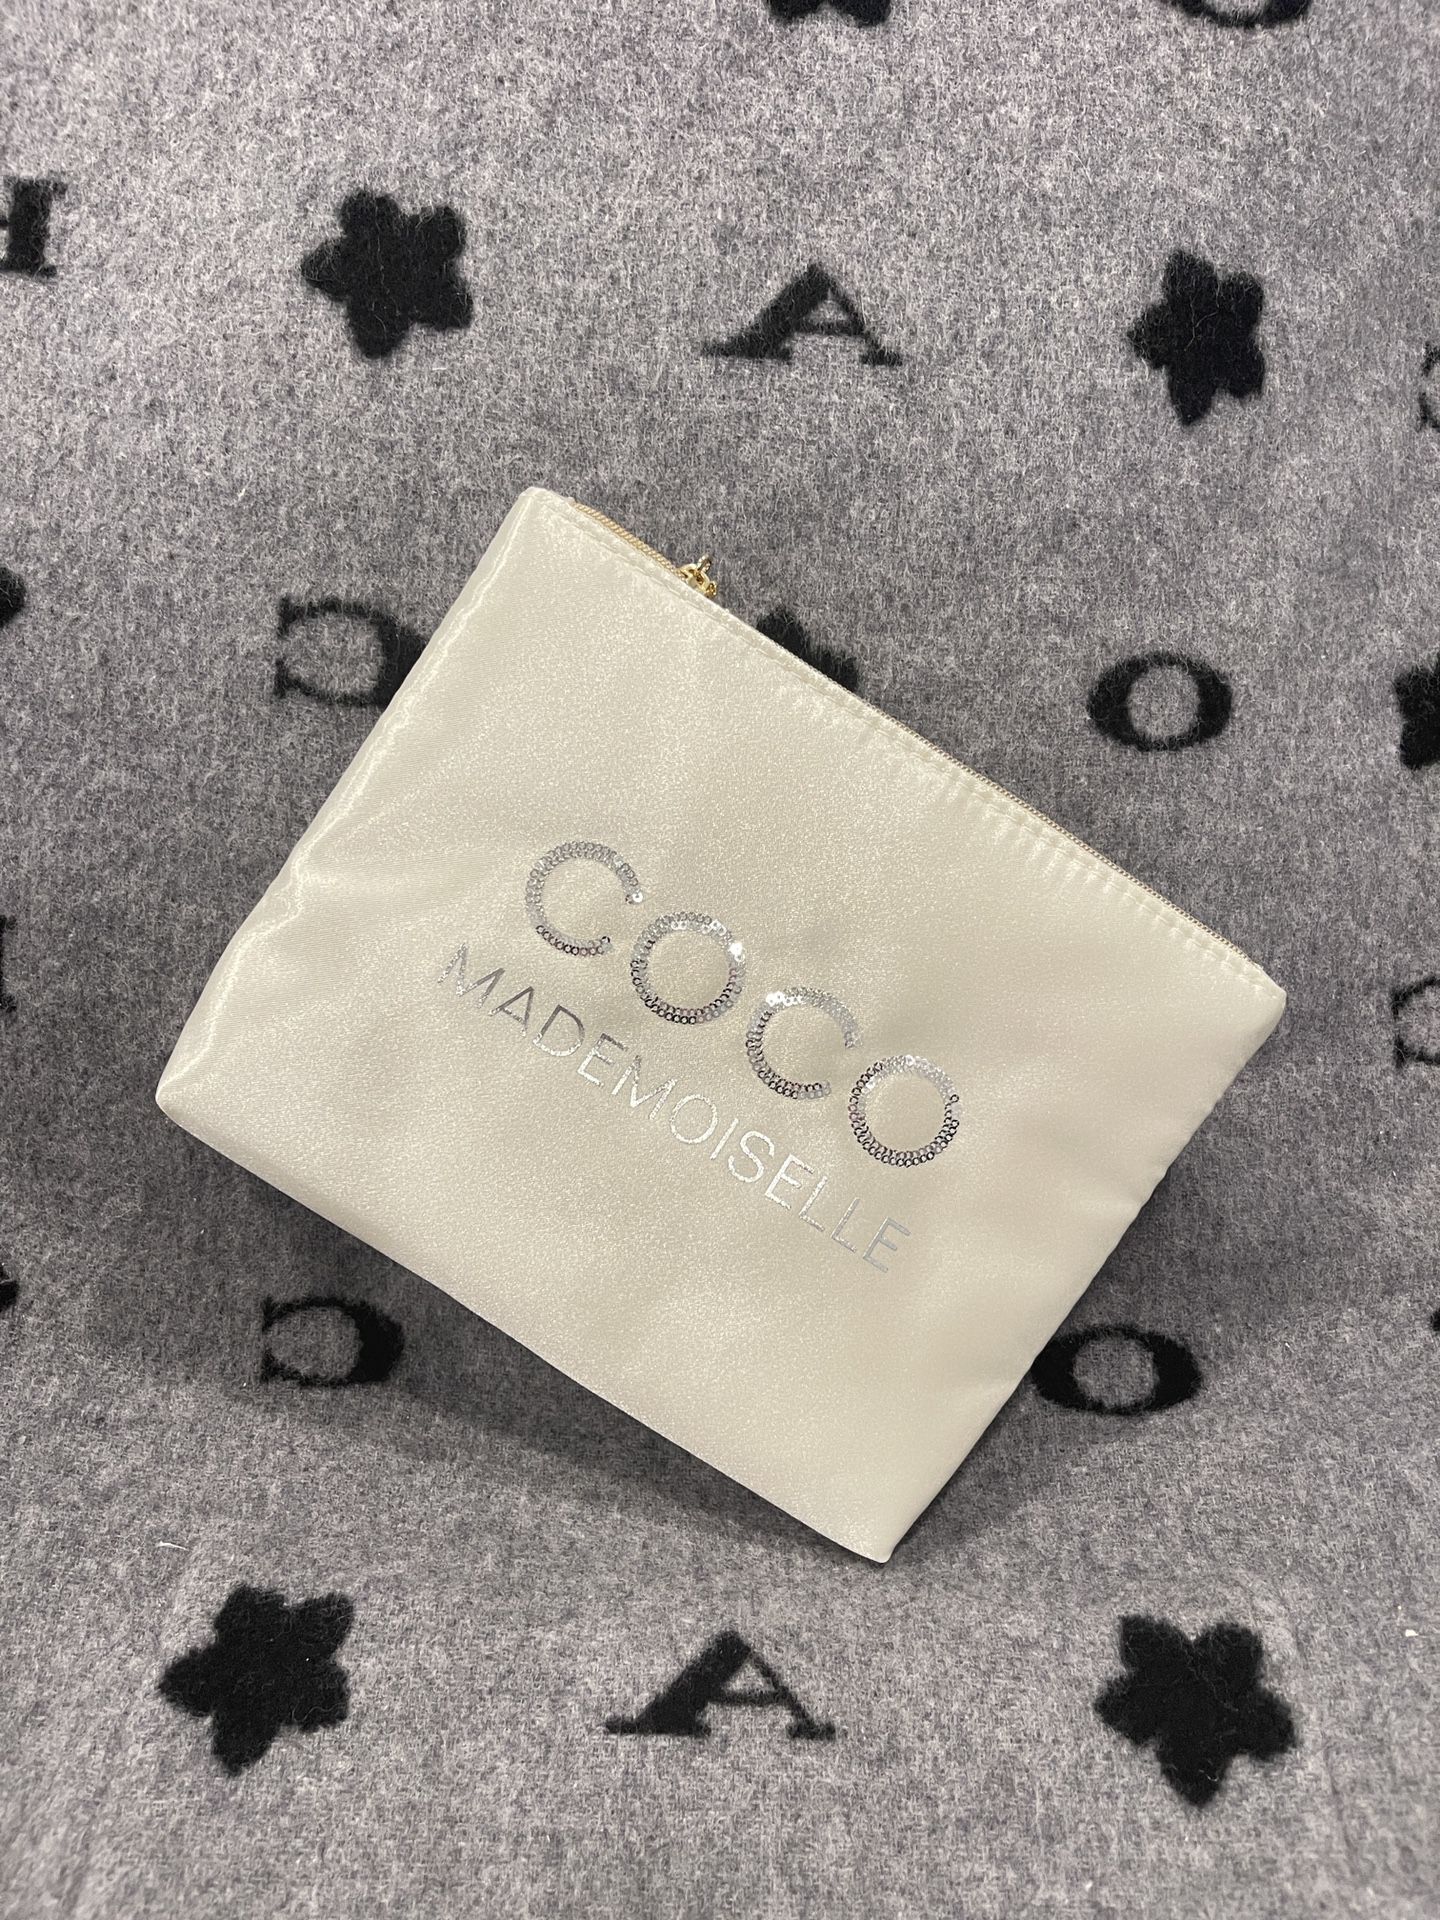 Chanel limited coco mademoiselle pouch bag